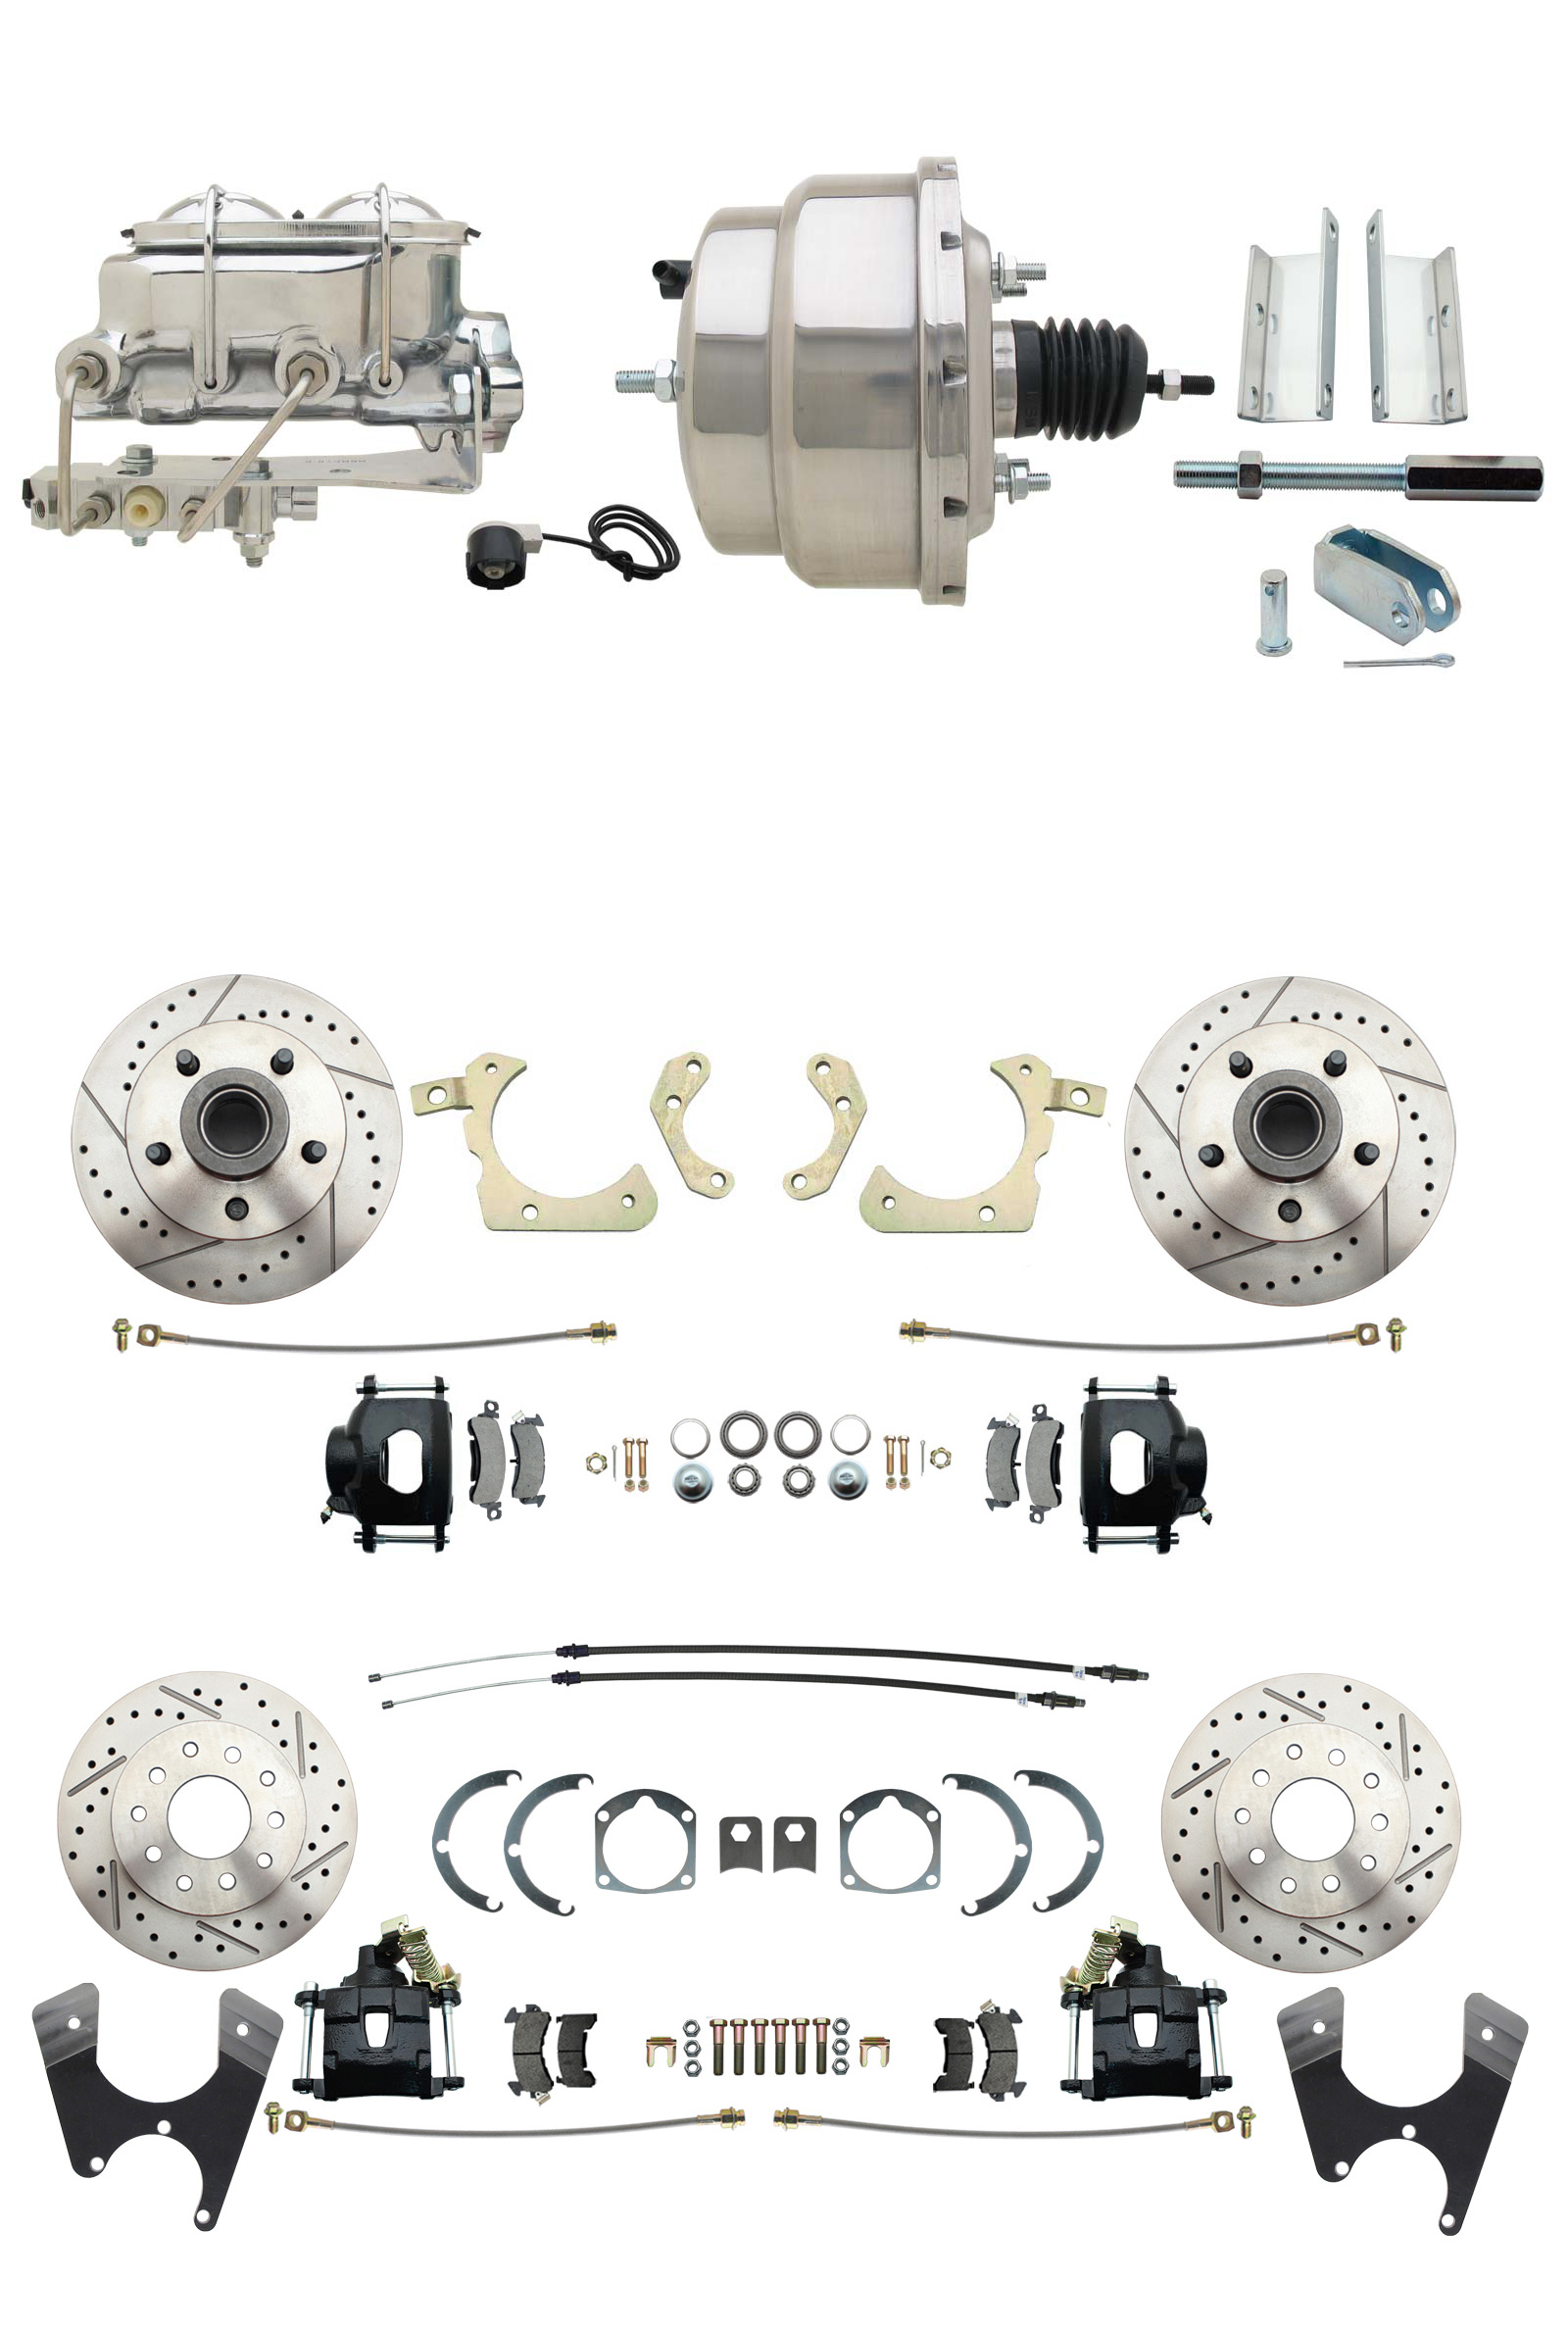 1955-1958 GM Full Size Front & Rear Power Disc Brake Kit Black Powder Coated Calipers Drilled/Slotted Rotors (Impala, Bel Air, Biscayne) & 8 Dual Stainless Steel Conversion Kit W/ Chrome Master Cylinder Bottom Mount Dis